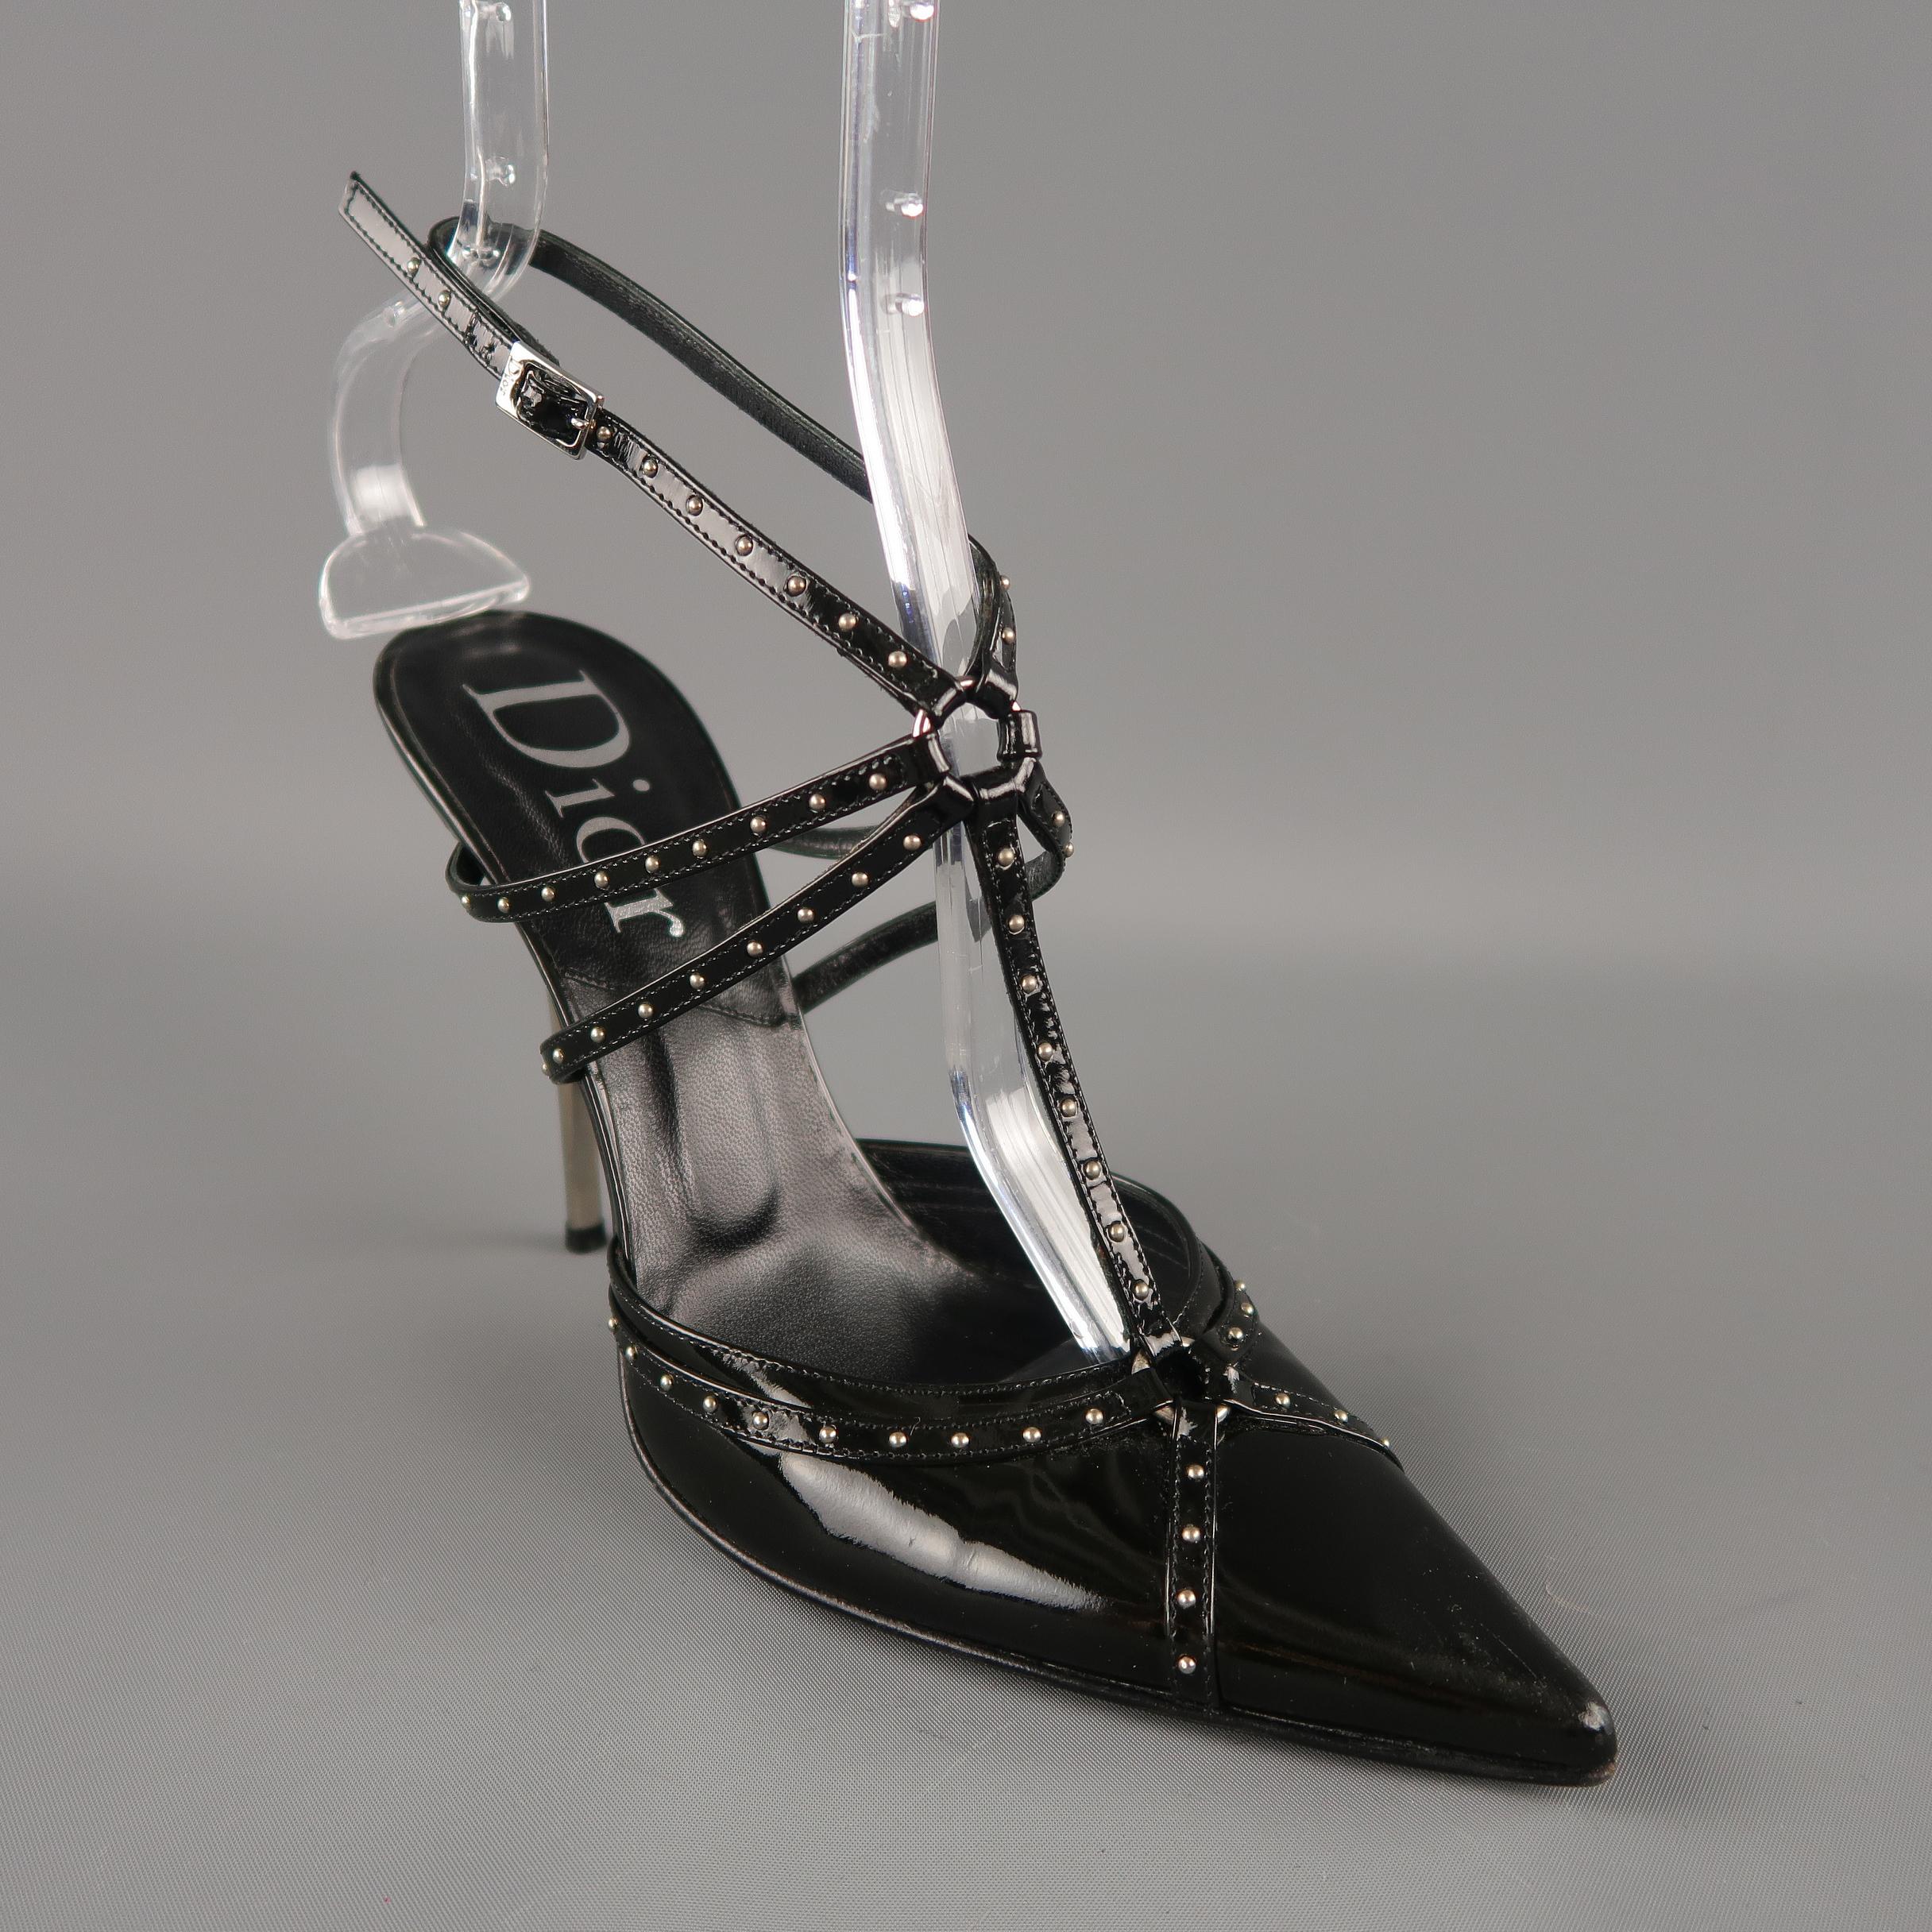 Archive CHRISTIAN DIOR by JOHN GALLIANO pumps come in black patent leather with a pointed toe, silver tone metal stiletto heel, and studded bondage harness with slingback ankle strap. Made in Italy.
 
Excellent Pre-Owned Condition.
Marked: IT 38.5
